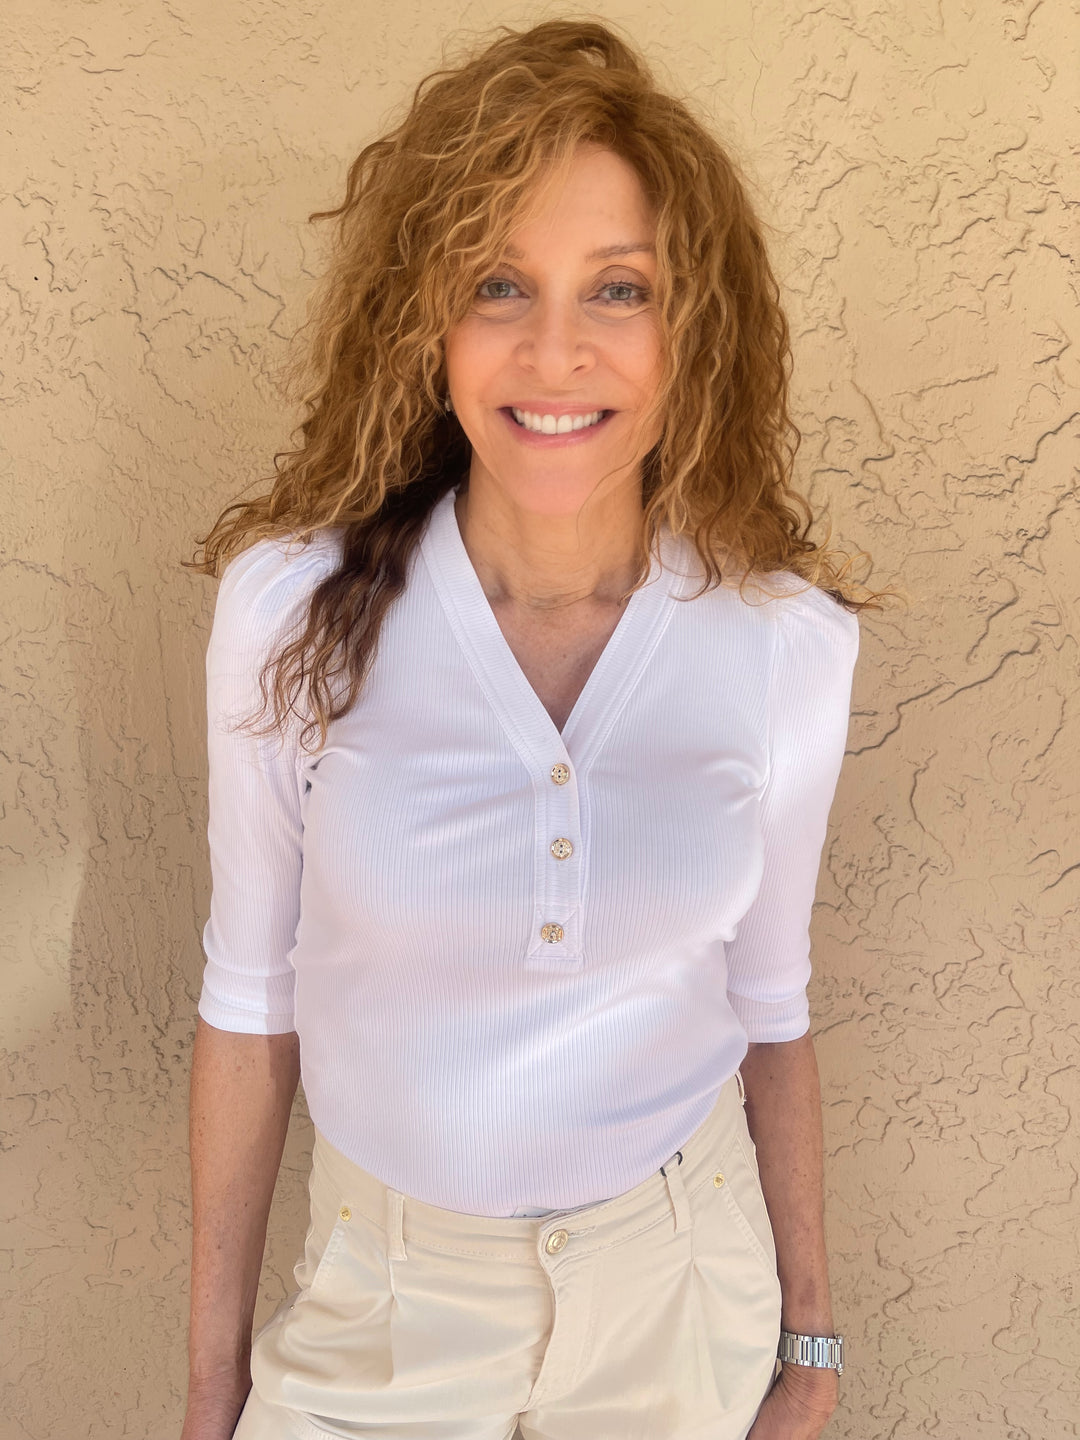 Barbara Katz Casual 3/4 Sleeve V-Neck With 3 Buttons - White